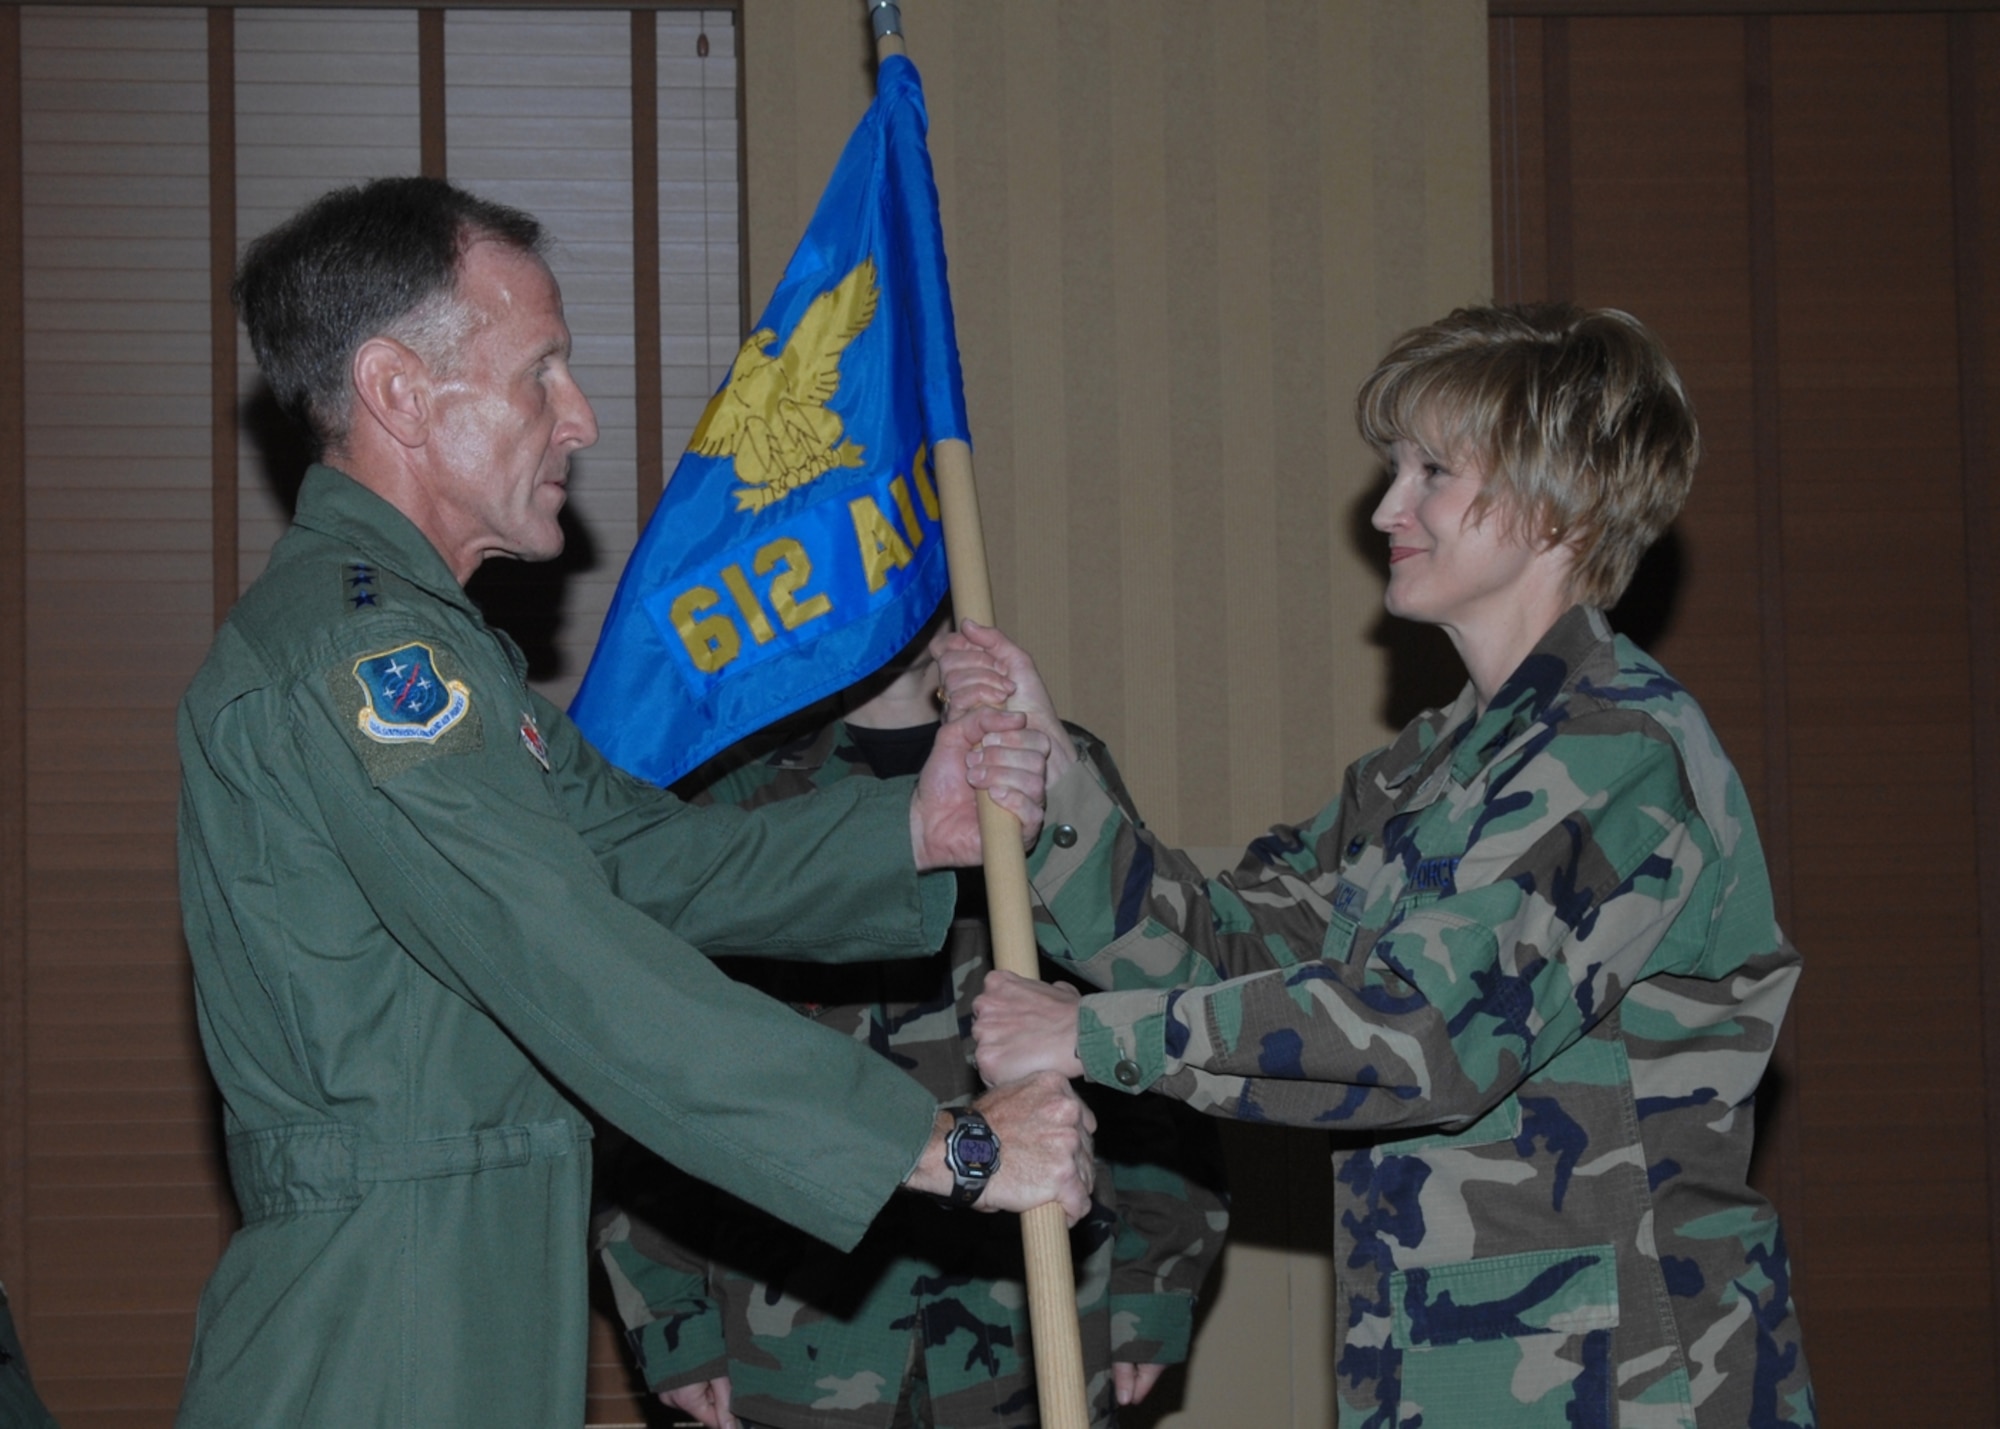 Col. Margaret Schalch (right), the Commander, 612th Air Intelligence Group, relinquishes command to Lt. Gen. Norman Seip, the Commander, 12th Air Force (Air Forces Southern) during an inactivation and redesignation ceremony Feb. 29 at Davis-Monthan Air Force Base, Ariz. The 612th Air Intelligence Group was deactivated, and reactivated as the 12th AF (AFSOUTH) A-2 Division with Colonel Schalch as the commander. 